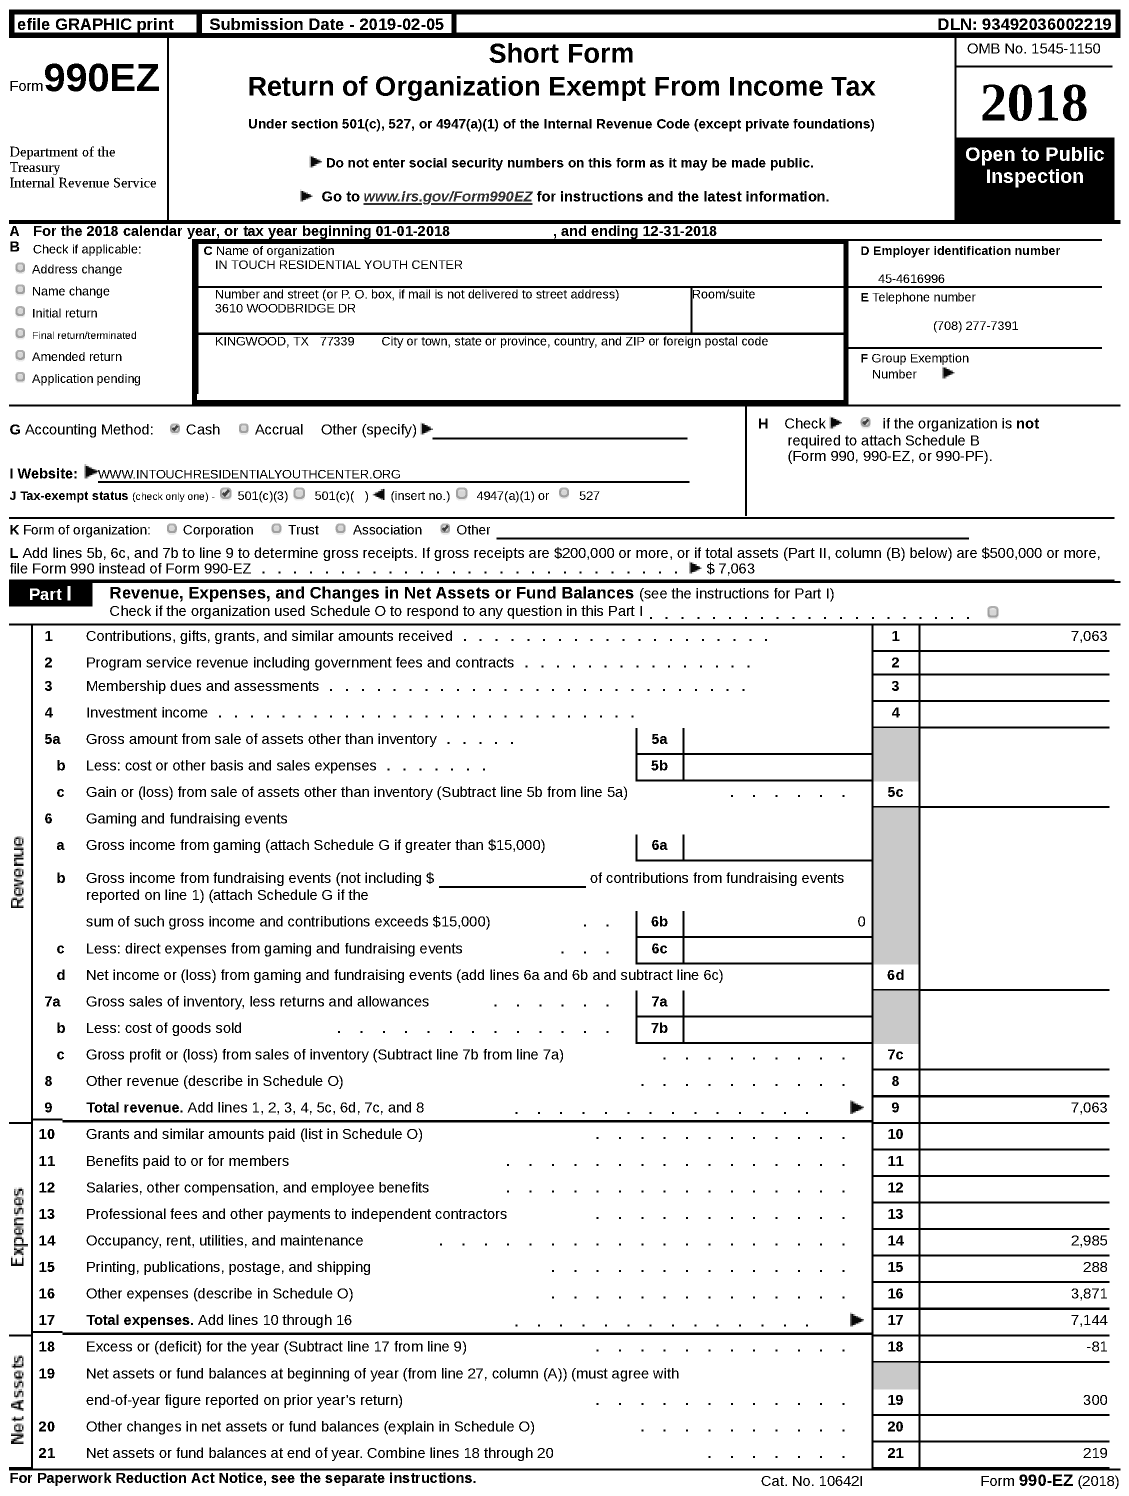 Image of first page of 2018 Form 990EZ for In Touch Residential Youth Center